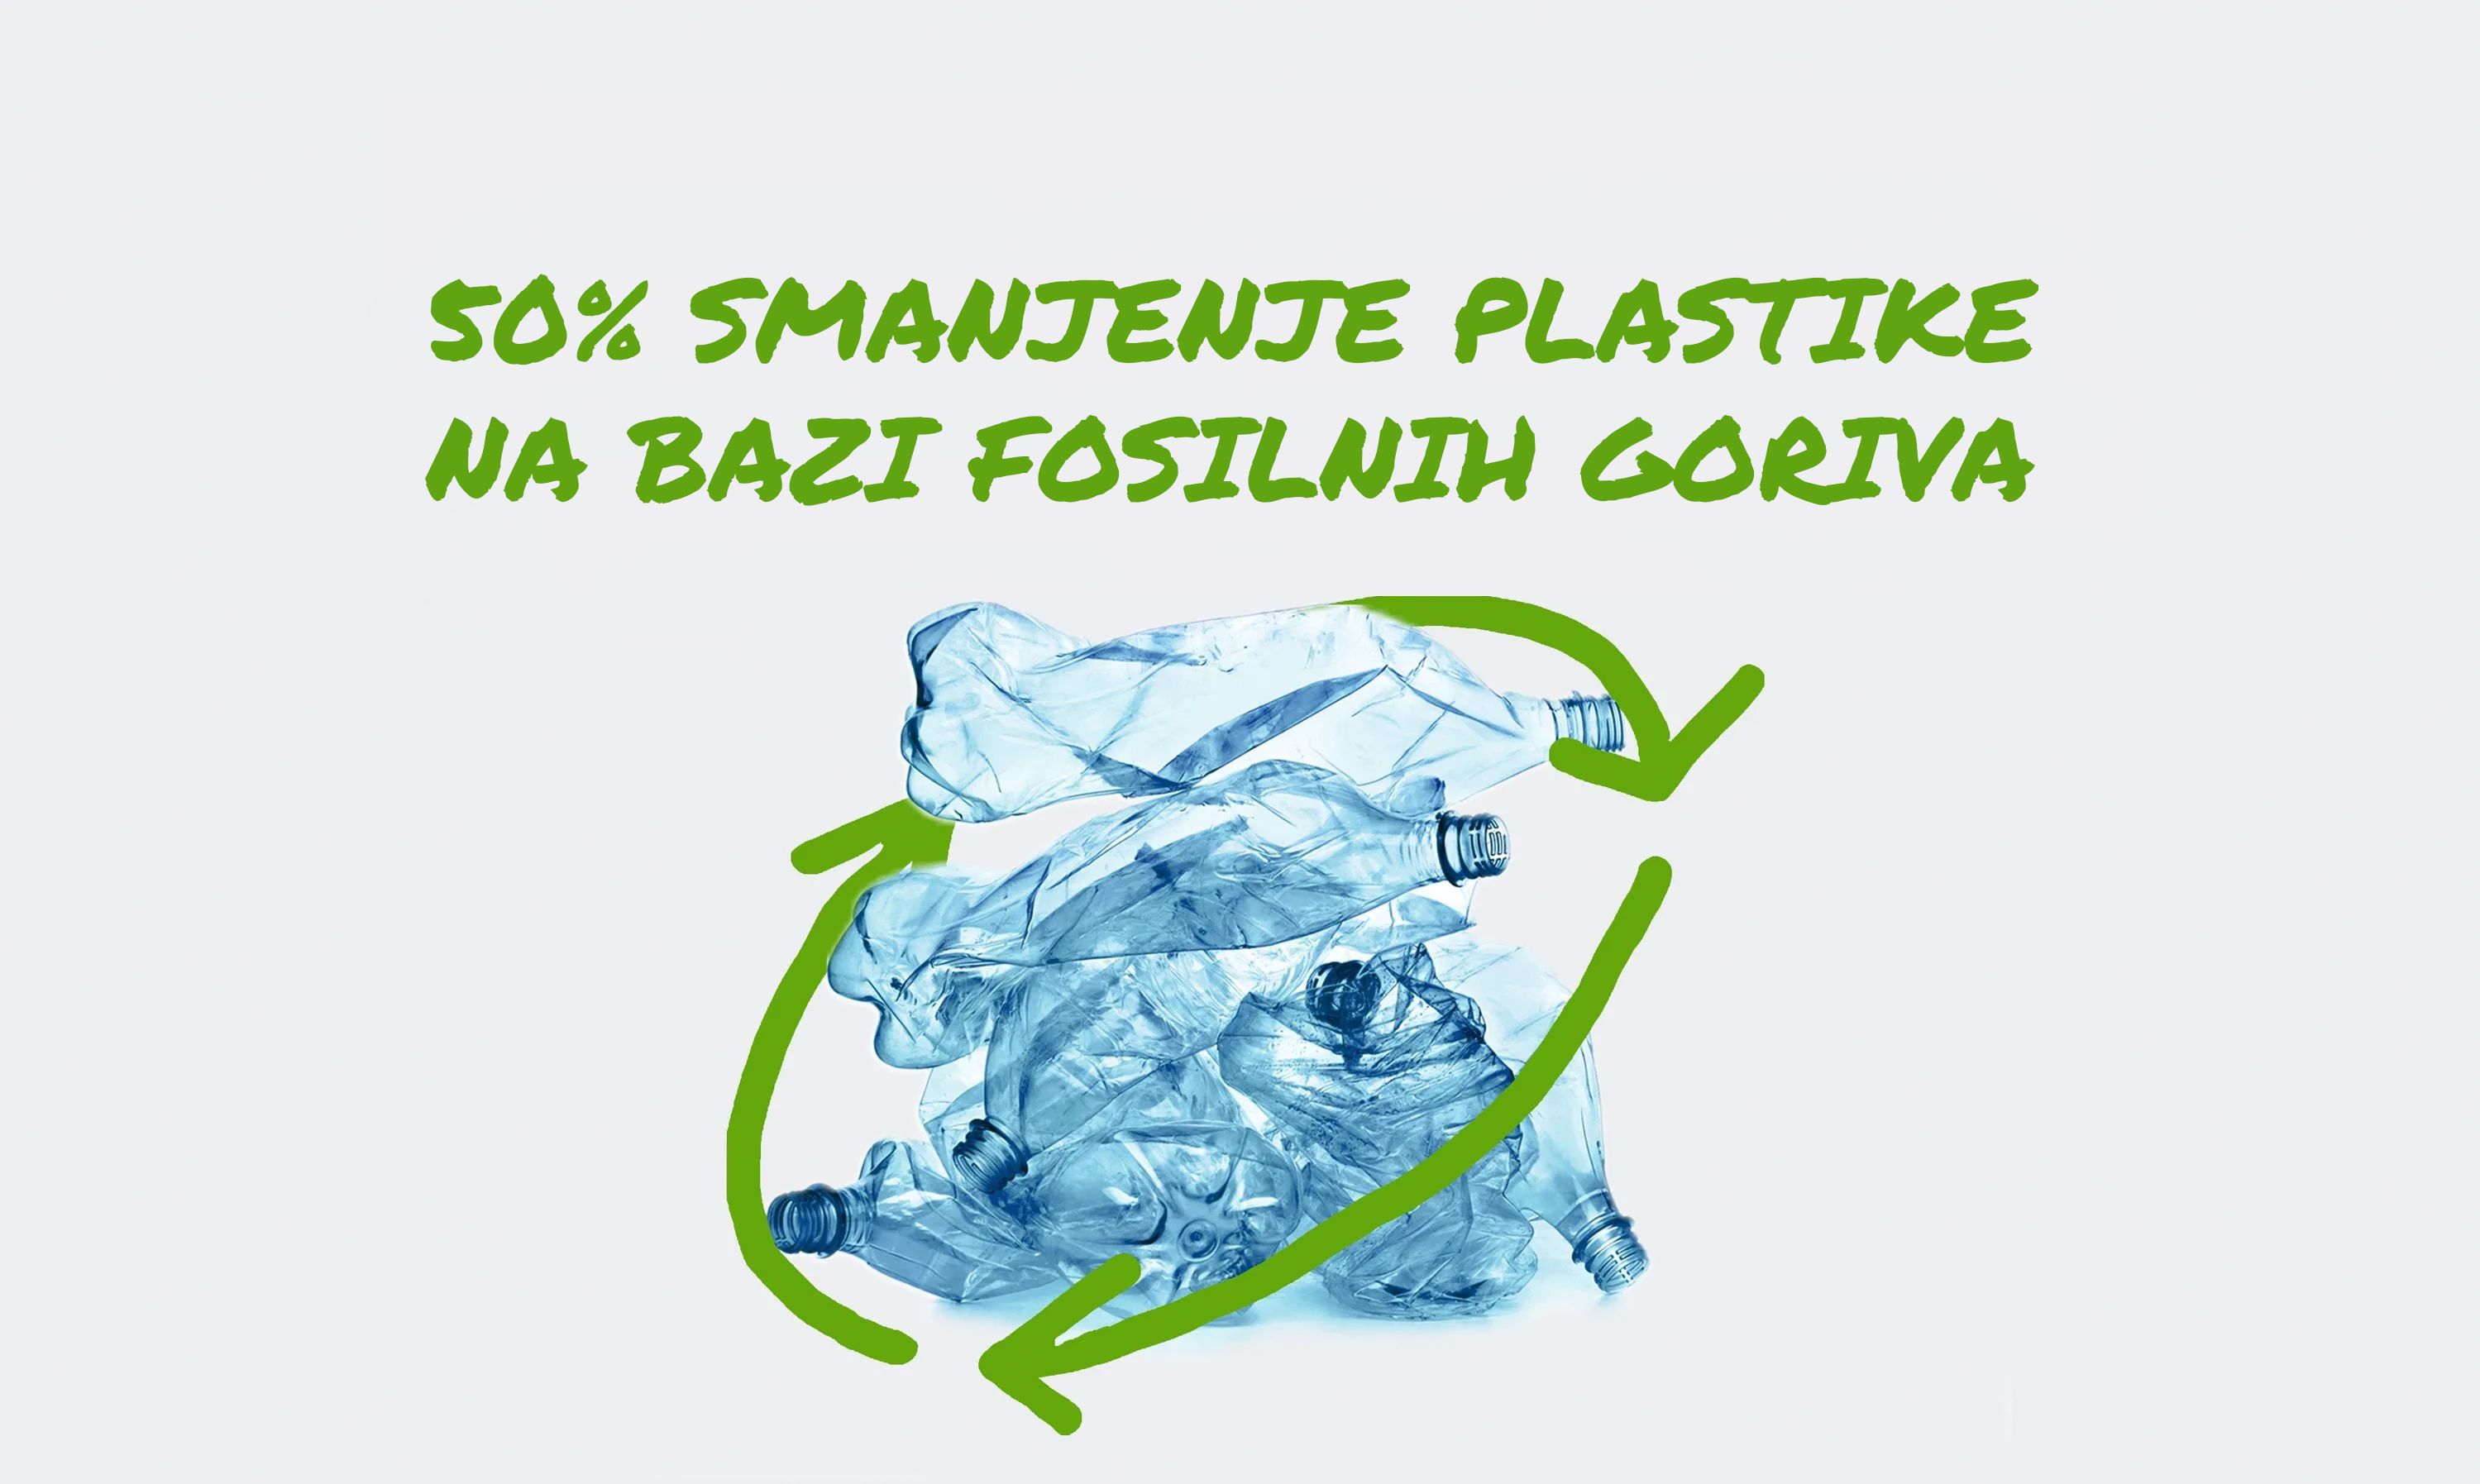 A stack of discarded plastic bottles encircled by a stylized recycling symbol